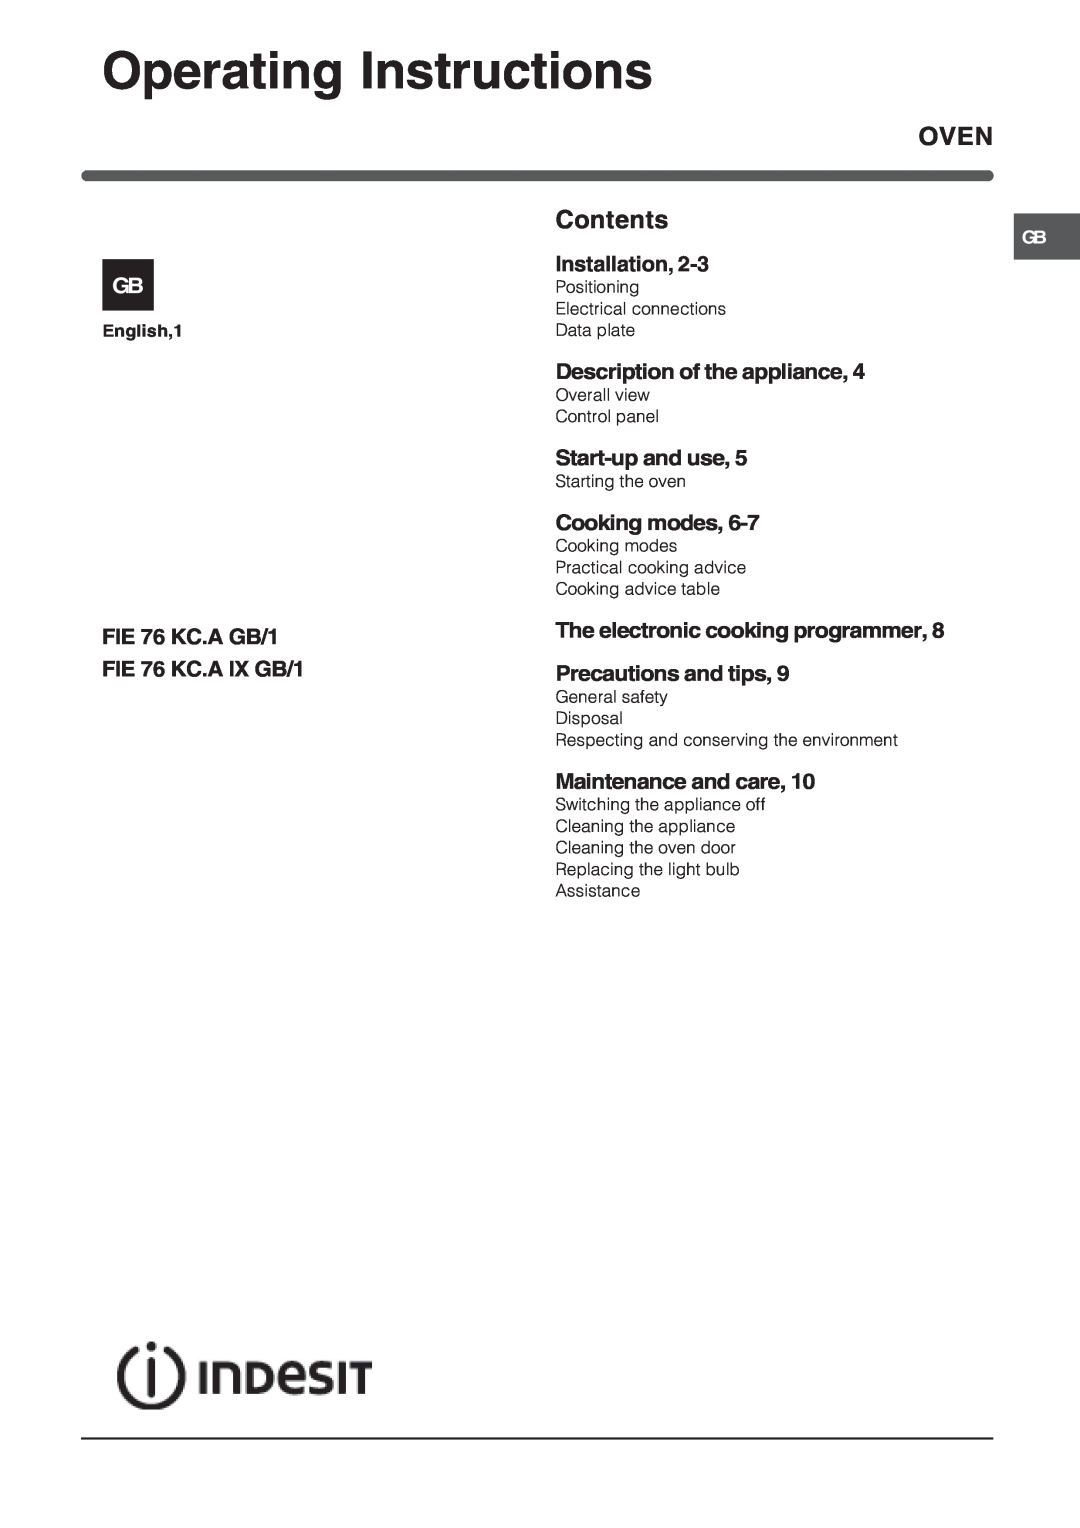 Indesit manual Operating Instructions, FIE 76 KC.A GB/1 FIE 76 KC.A IX GB/1, Installation, Description of the appliance 